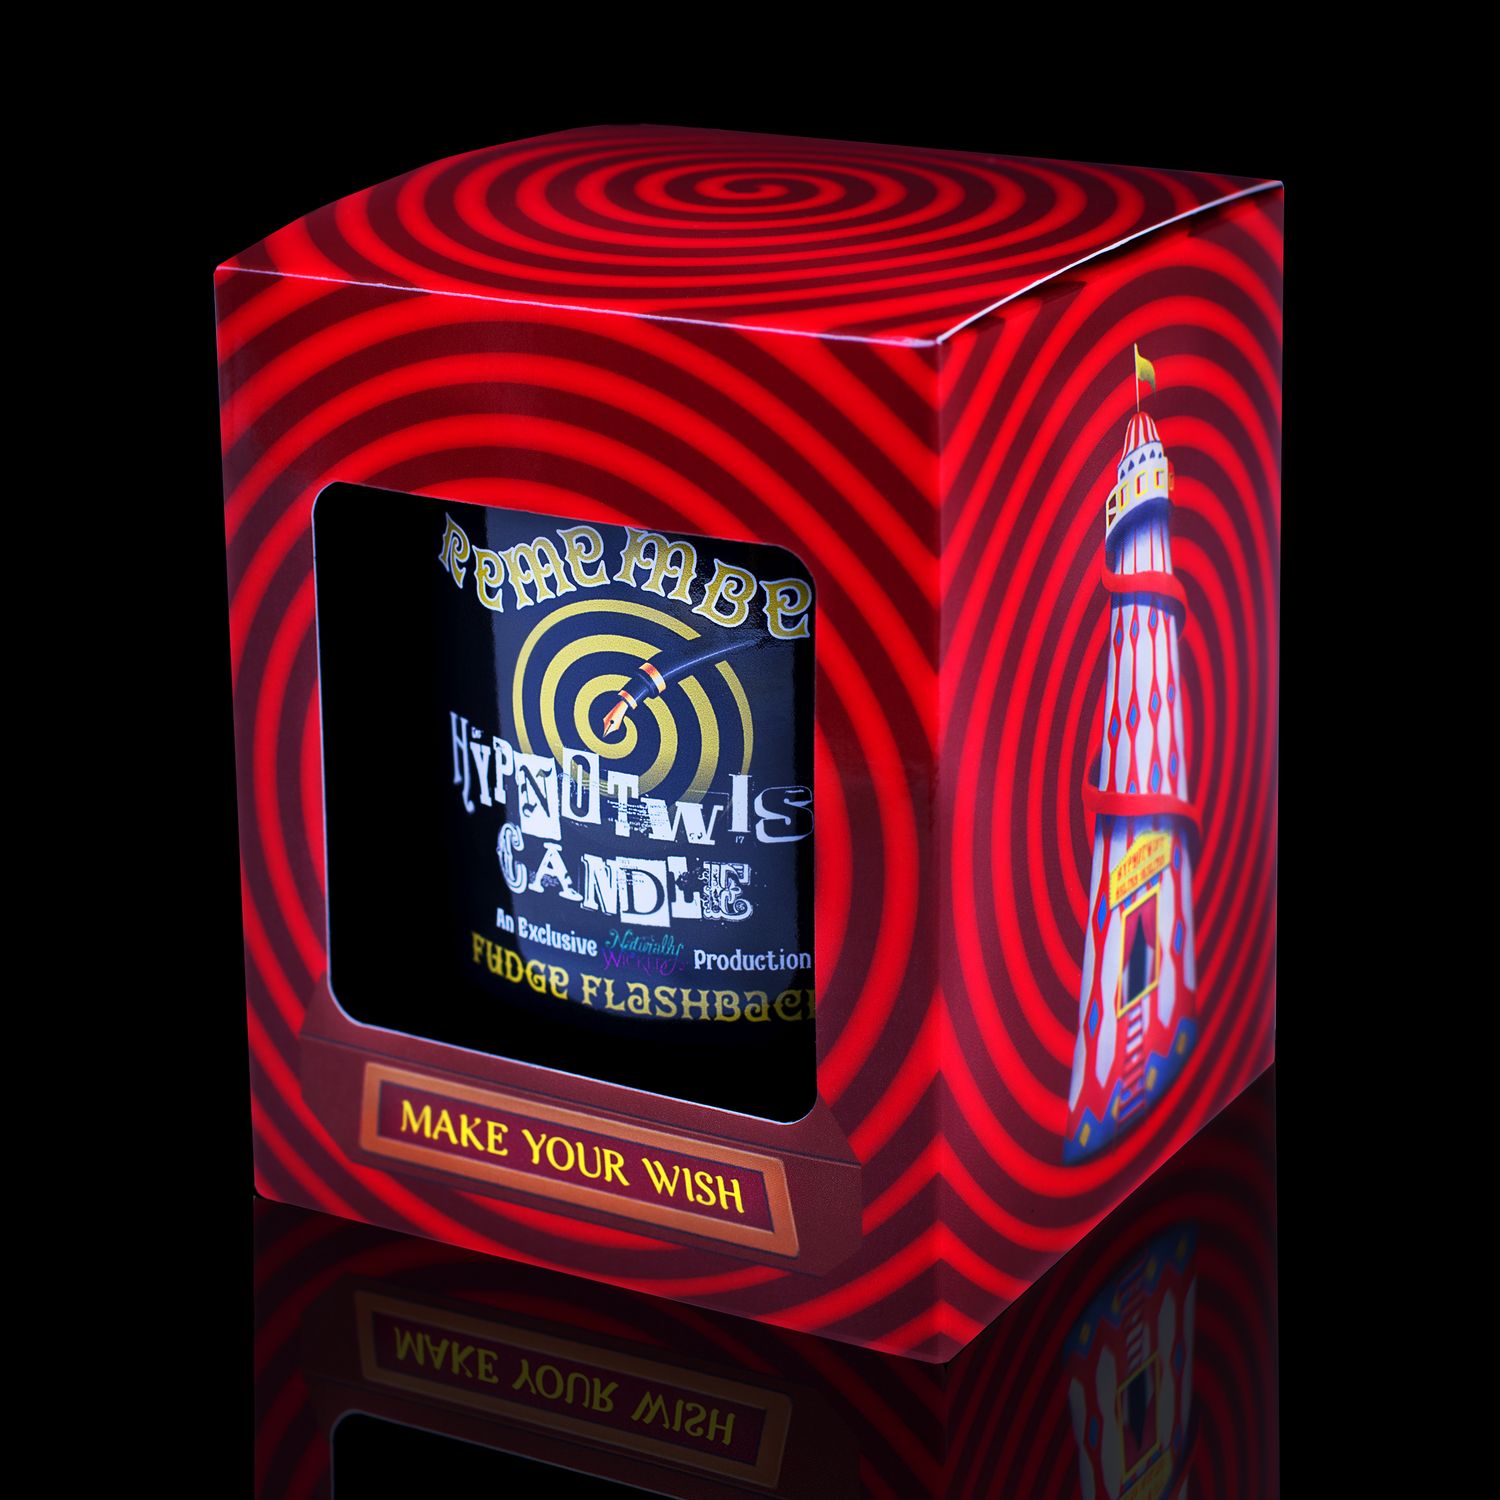 Side View Of The Naturally Wicked Hypnotwist Remember Candle, Plant-based Soy Brown Wax Scented With Fudge Flashbacks, Including A Tiger's Eye Crystal Spinning Top, Mirrored Lid & Red Circus Hypnotic Gift Box